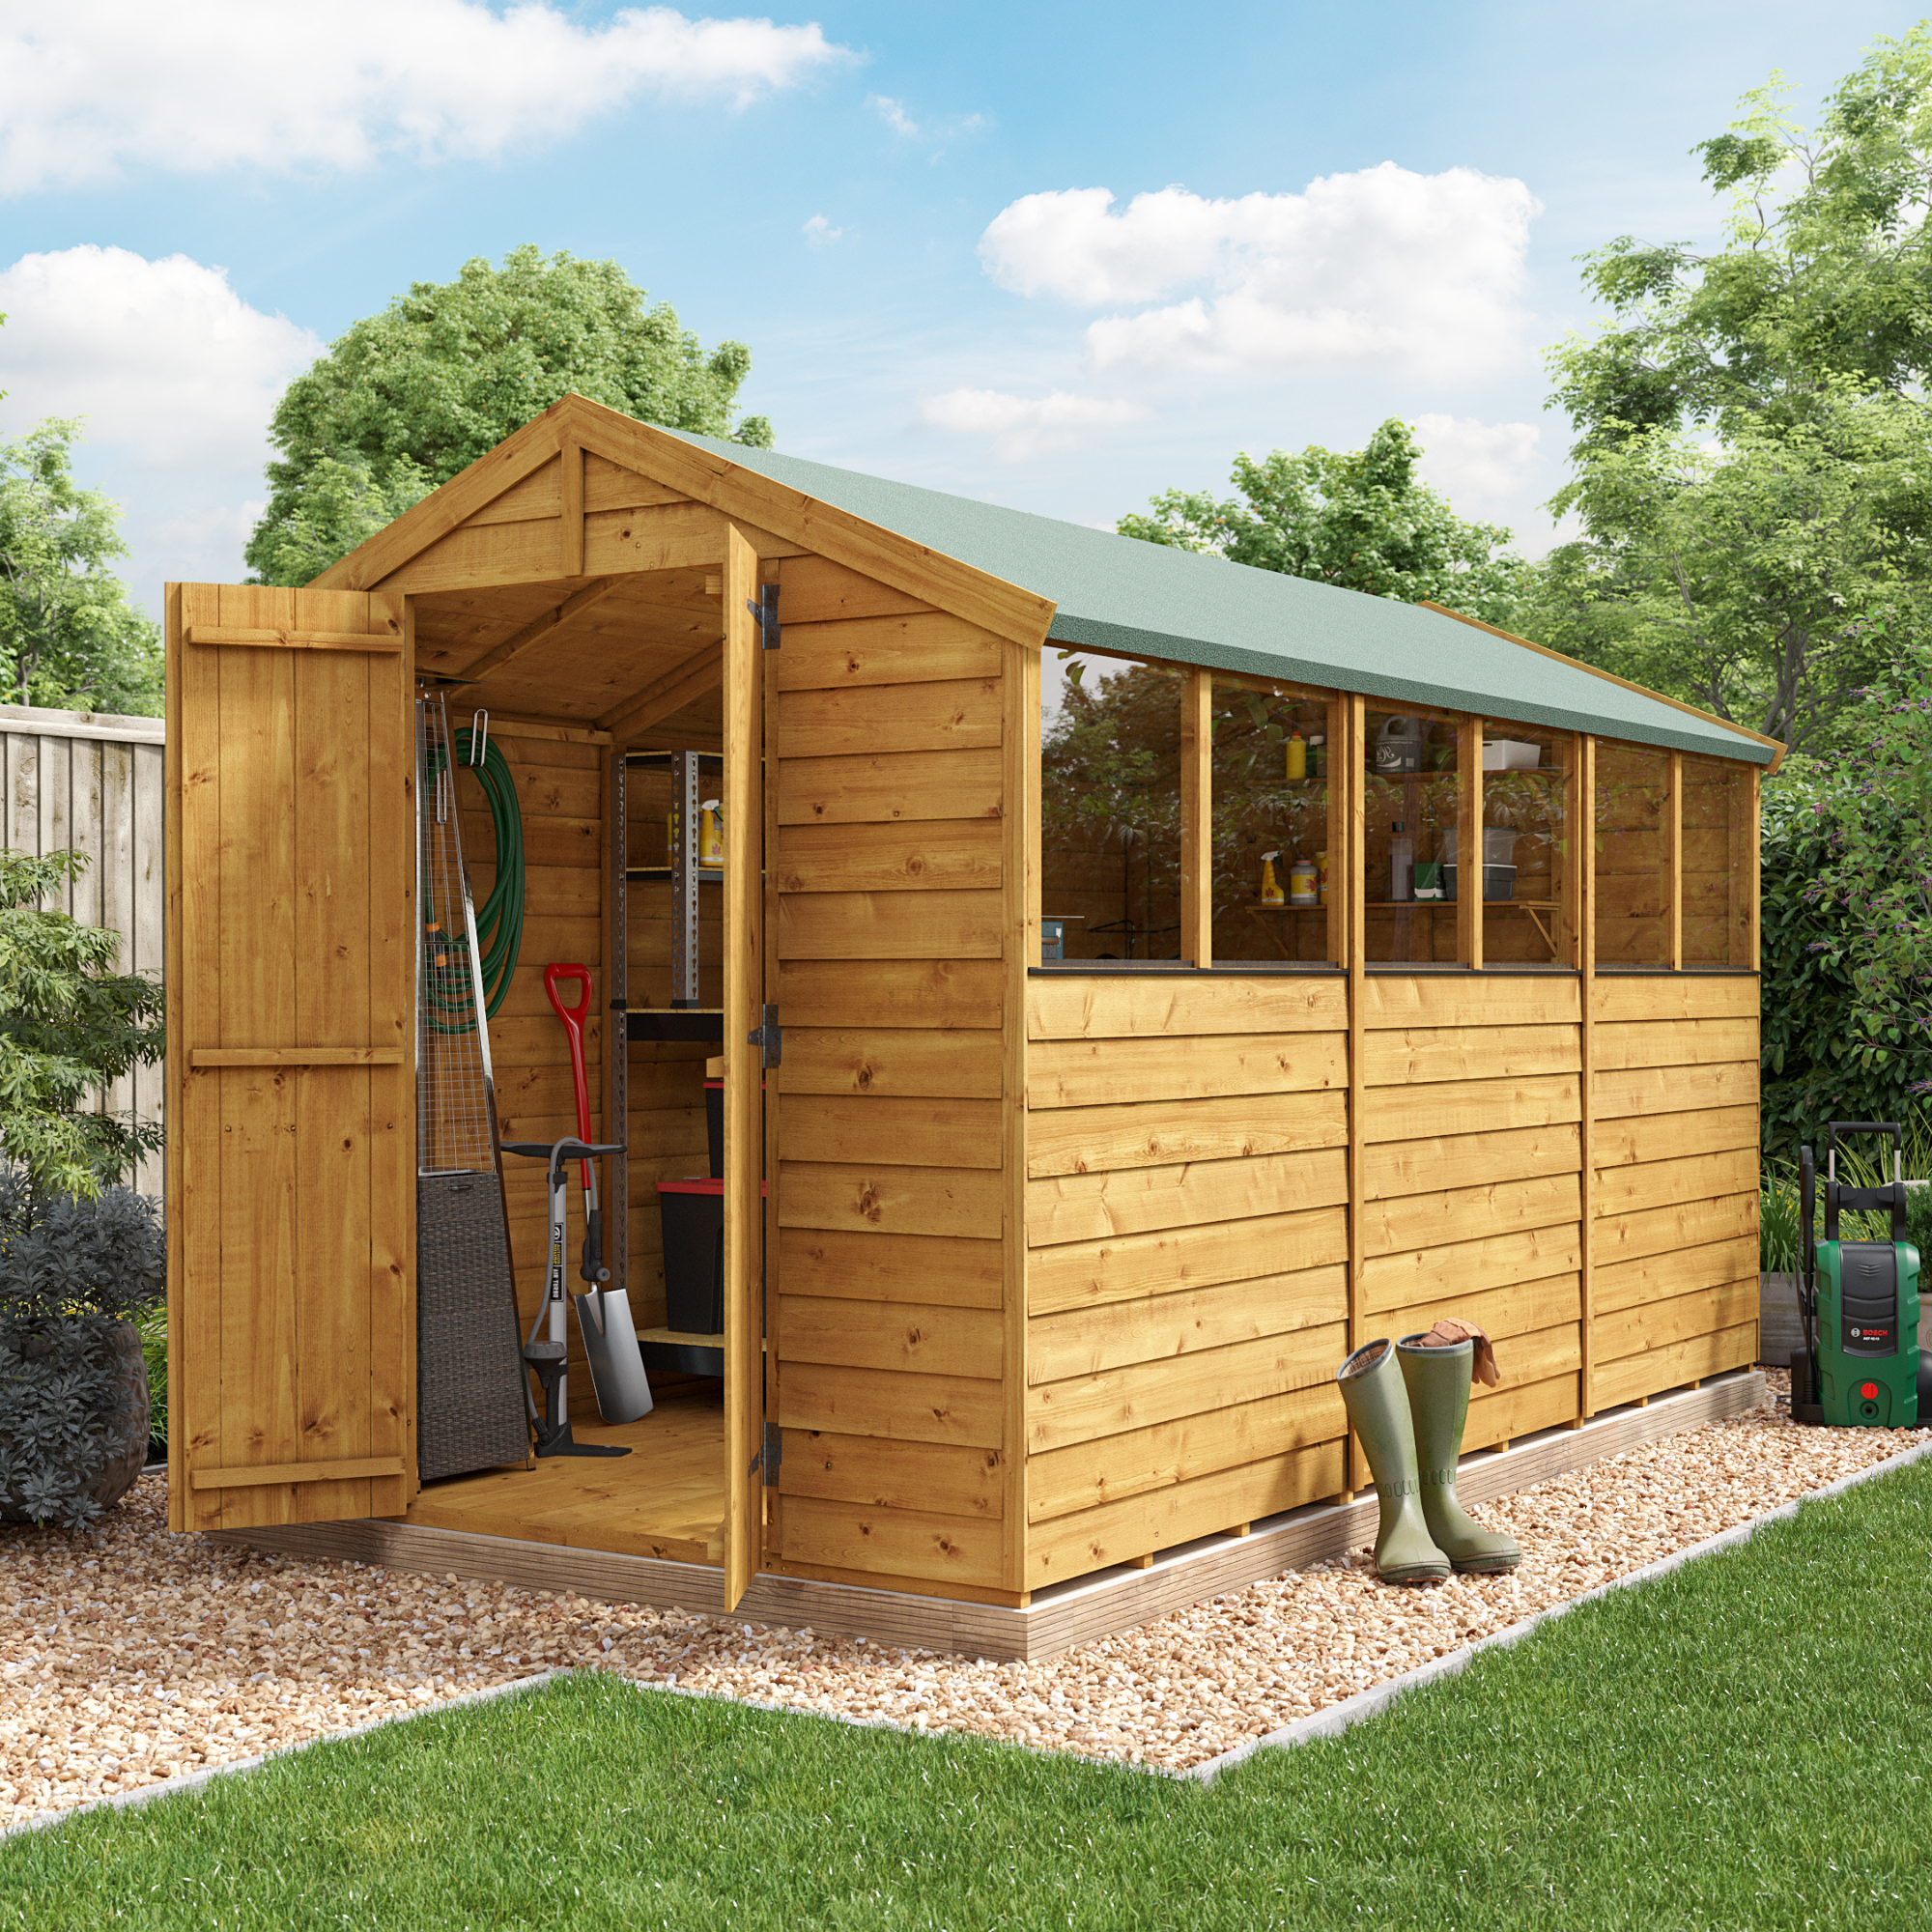 12 x 6 Shed - BillyOh Keeper Overlap Apex Wooden Shed - Windowed 12x6 Garden Shed